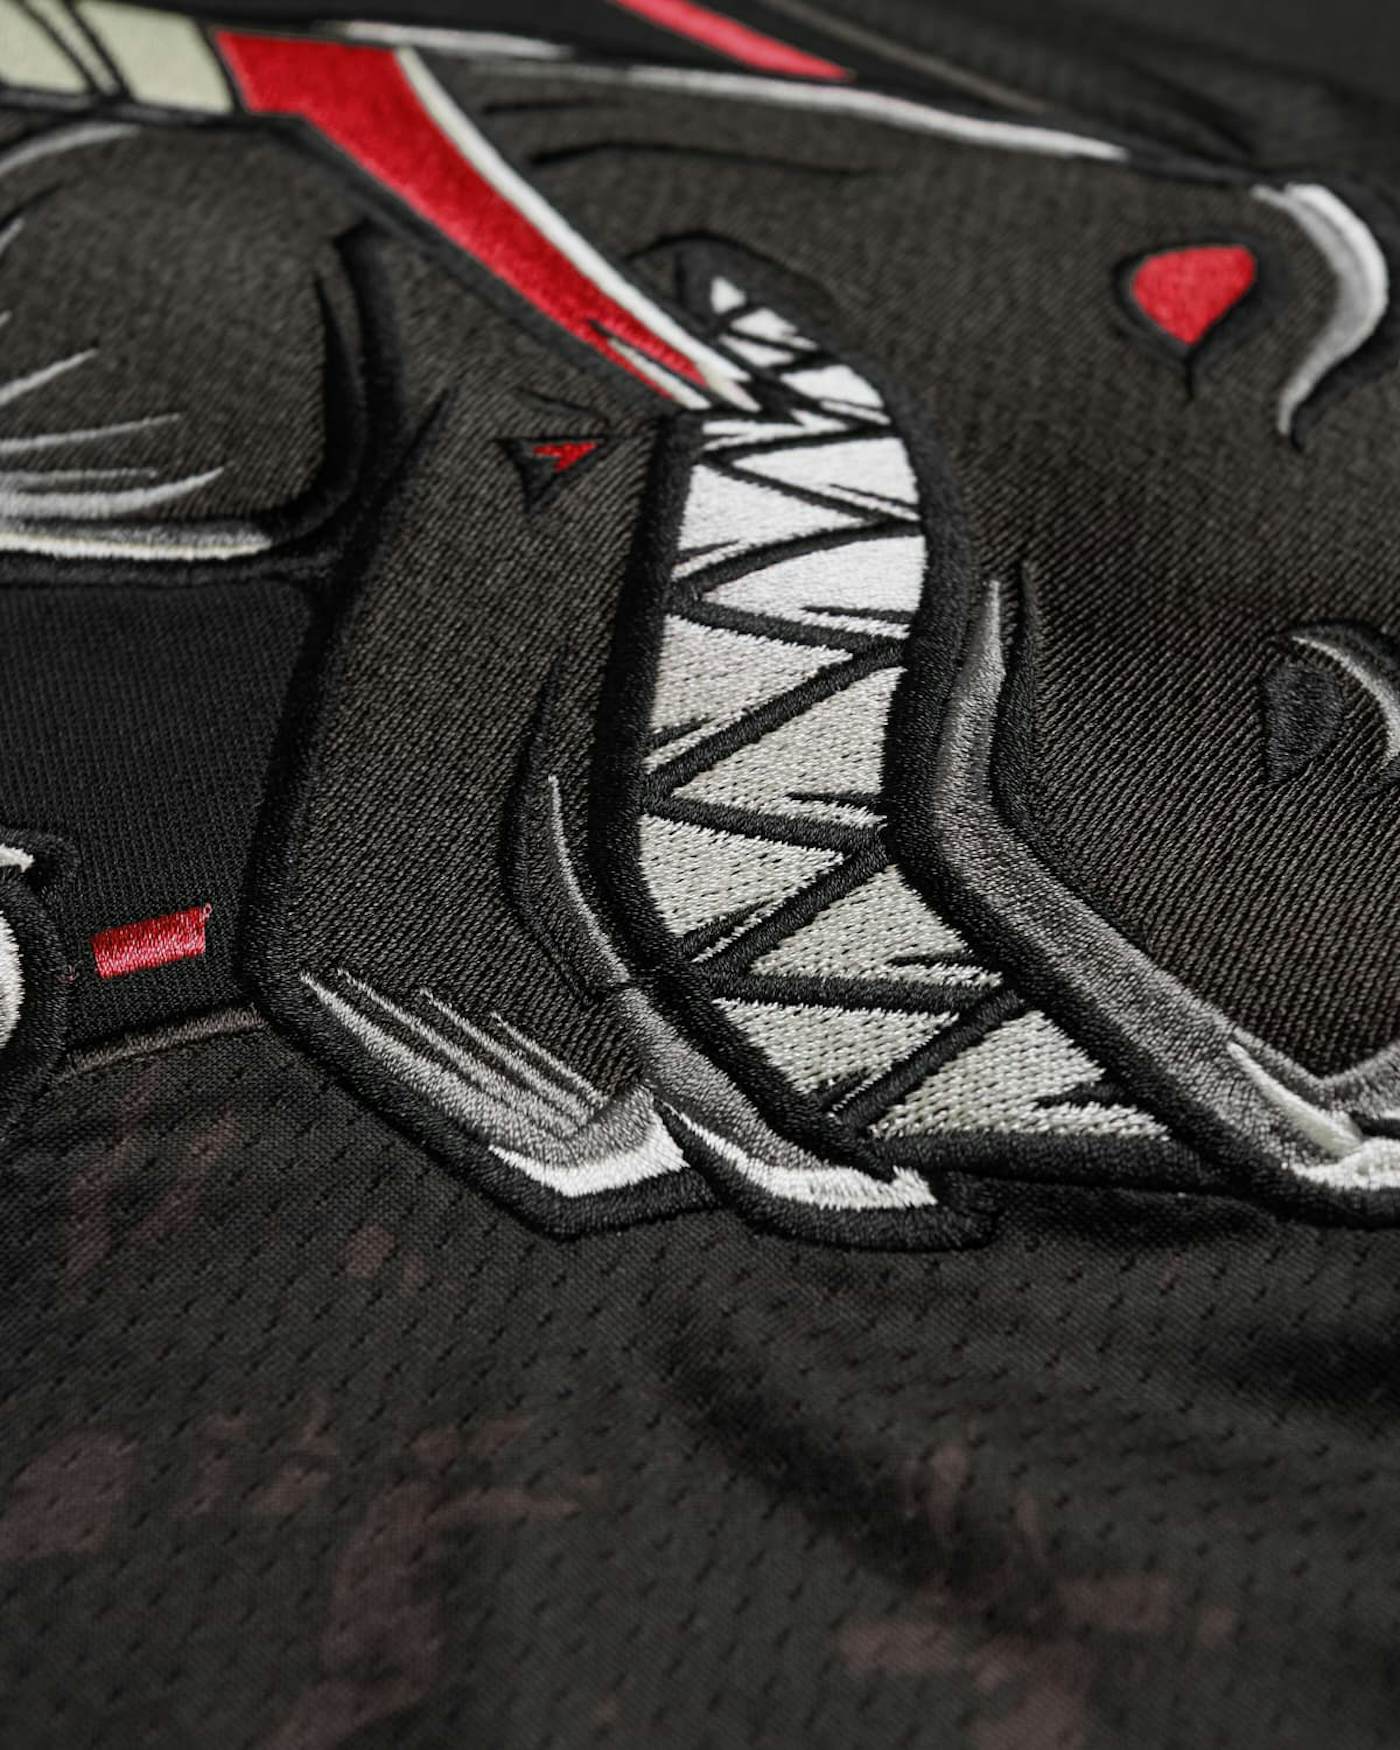 Excision Reveals Embroidered Hockey Jerseys in New Merchandise